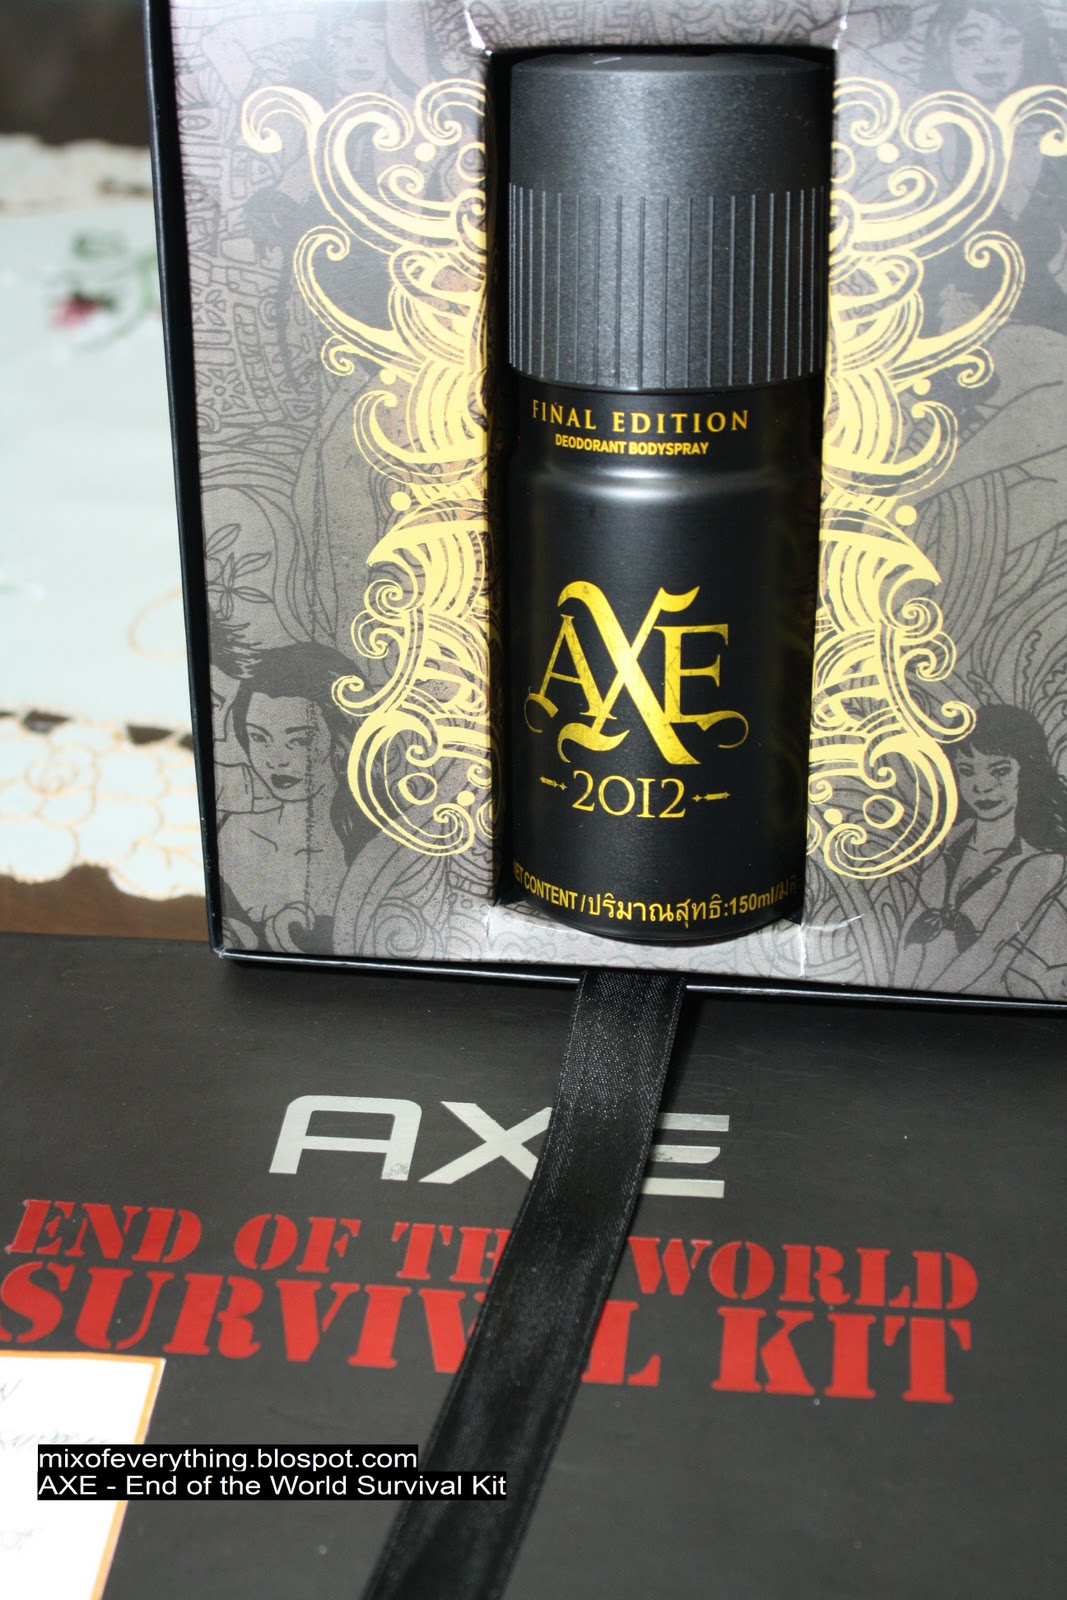 AXE: HAPPY OF THE WORLD SURVIVAL KIT. - Blog for Tech & Lifestyle